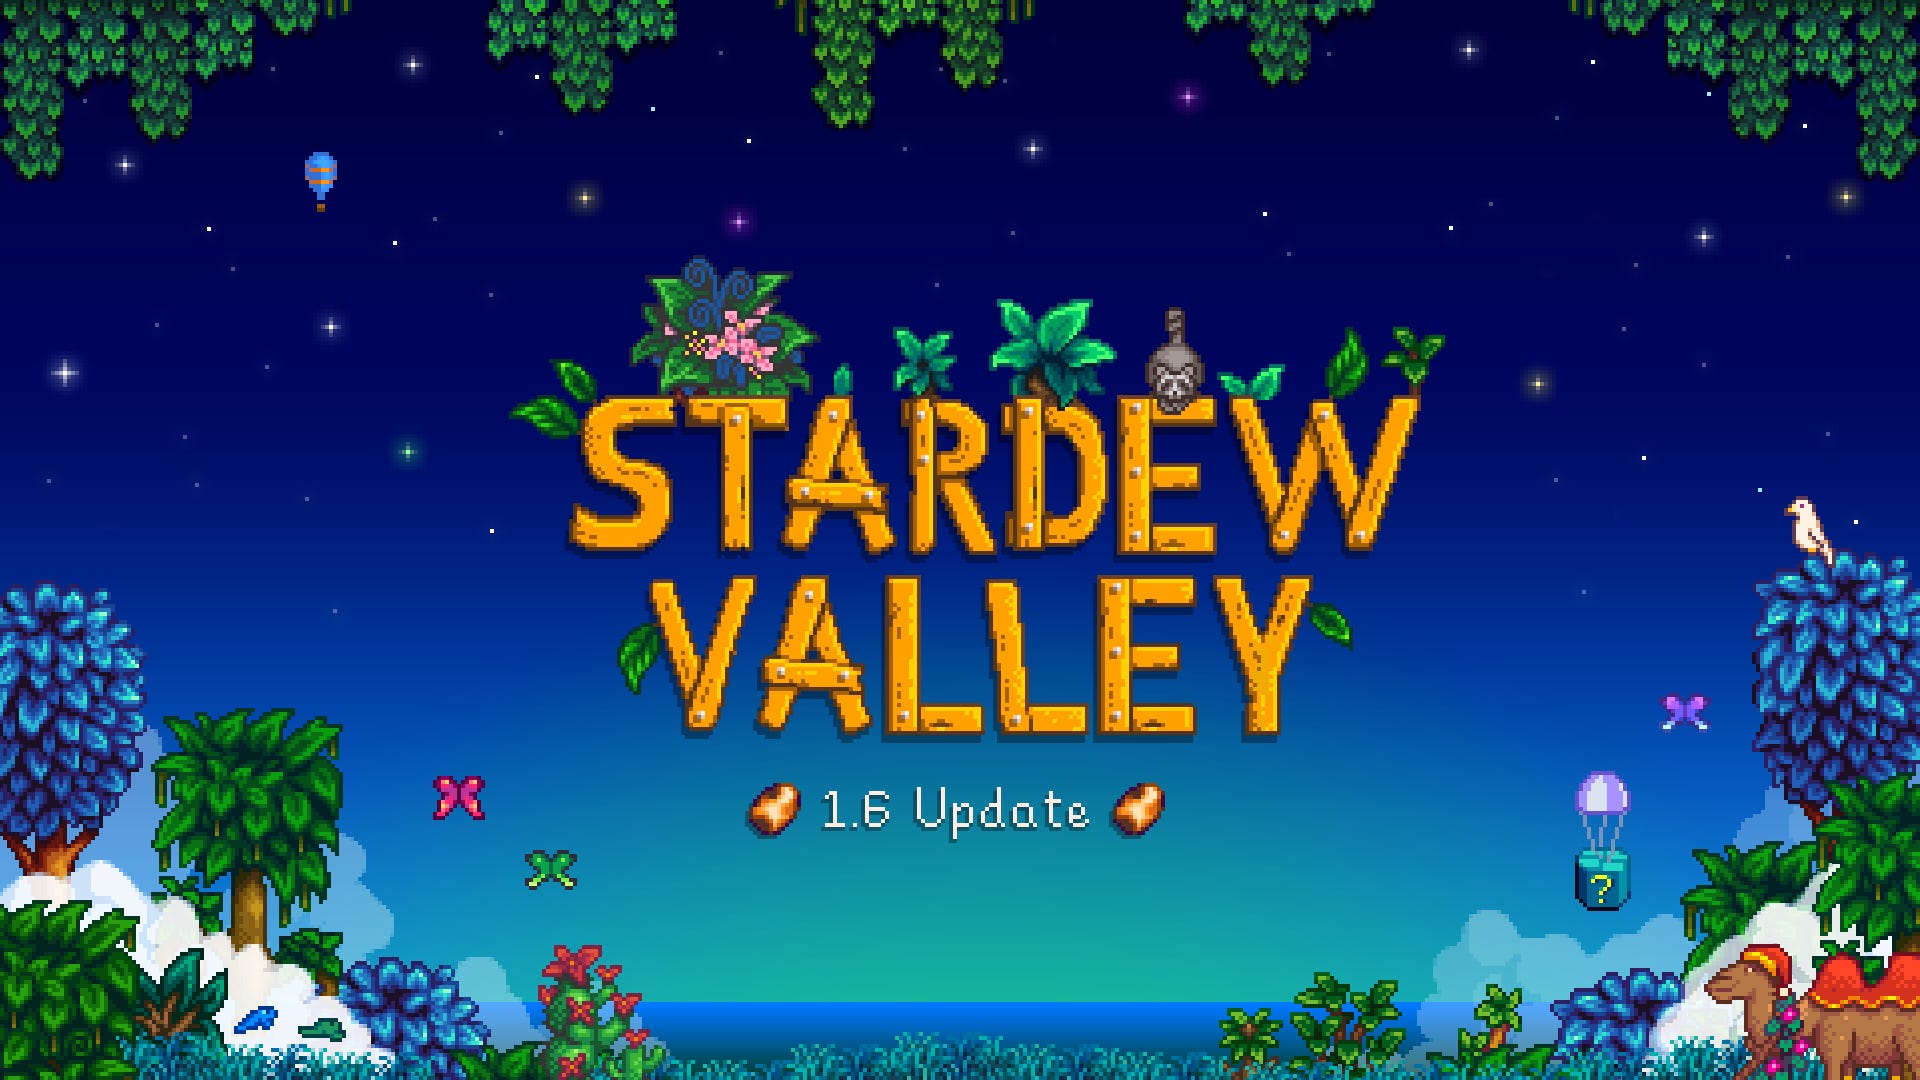 Stardew Valley update 1.6 is live with a treasure trove of content such as new pets, festivals, mystery boxes, and more farm-fresh delights